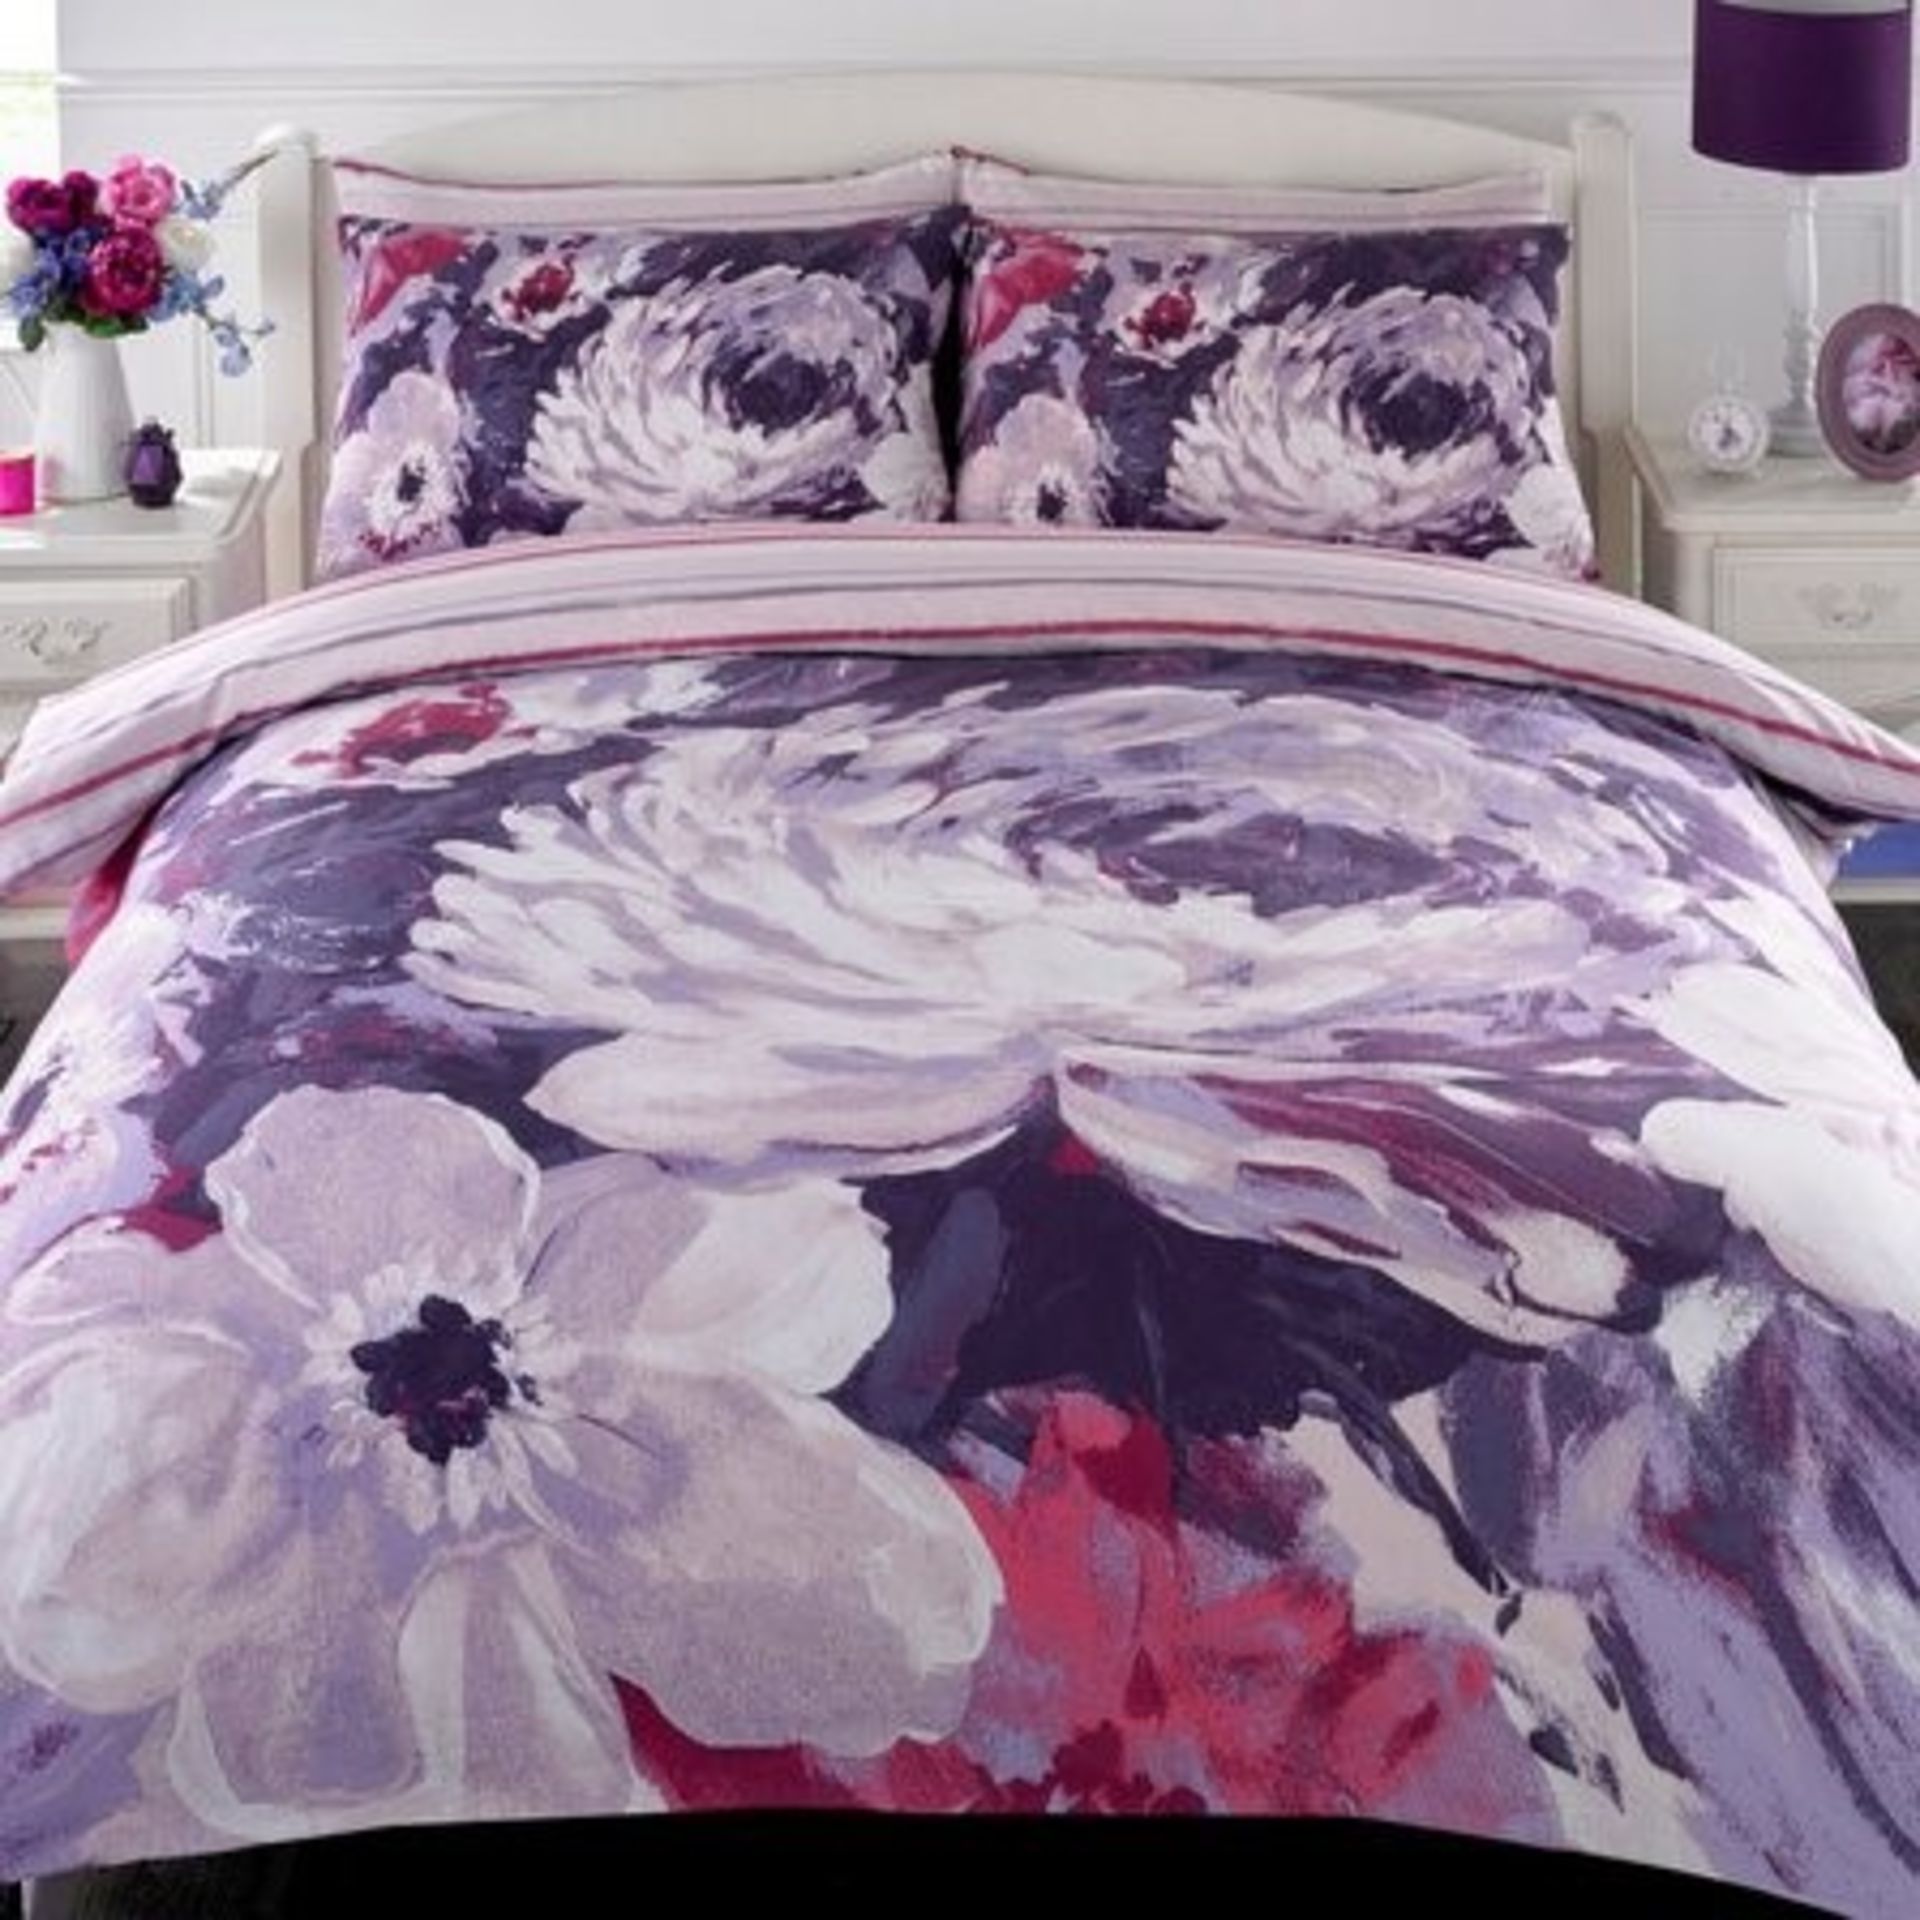 1 AS NEW BLOOM DOUBLE DUVET SET IN PURPLE (VIEWING